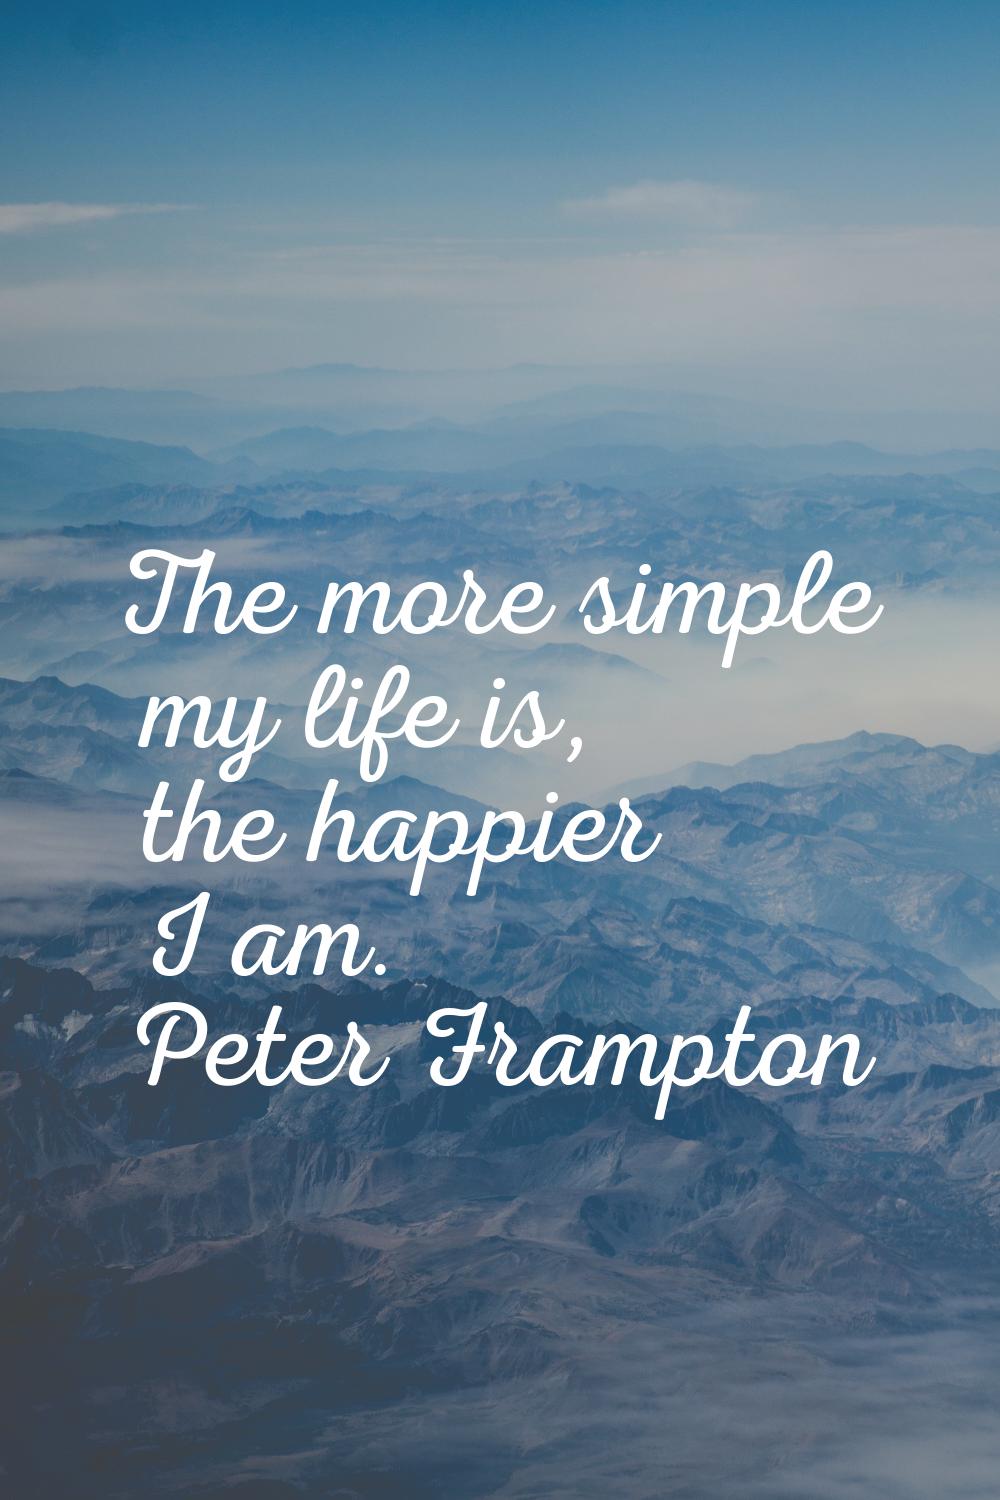 The more simple my life is, the happier I am.